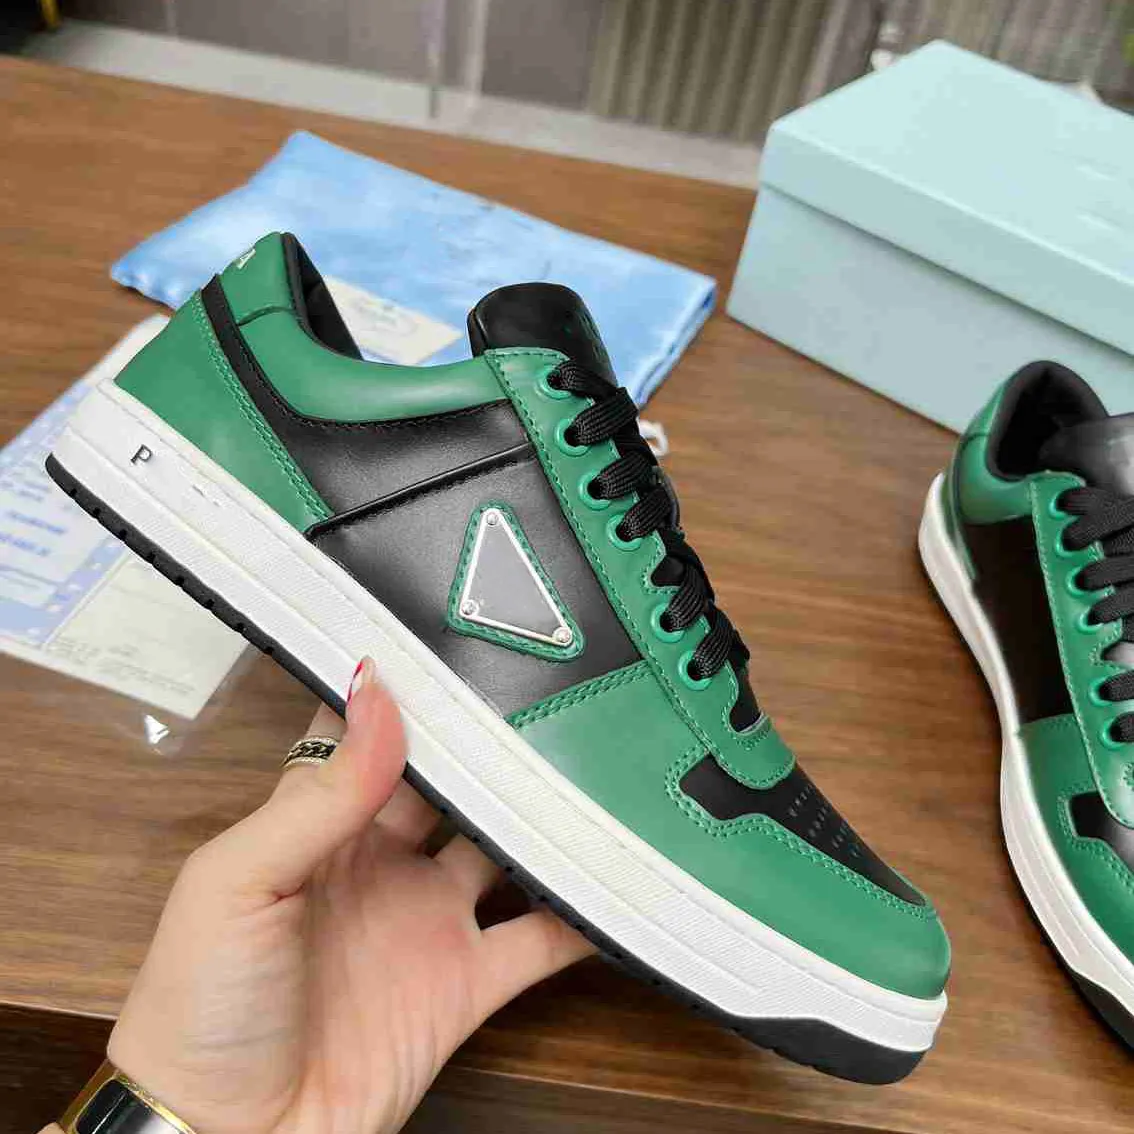 Designer Trainer Prad Skate Shoes Luxury Run Fashion Sneakers Women Men Sports Shoe Chaussures Casual Classic Sneaker Woman fghfg